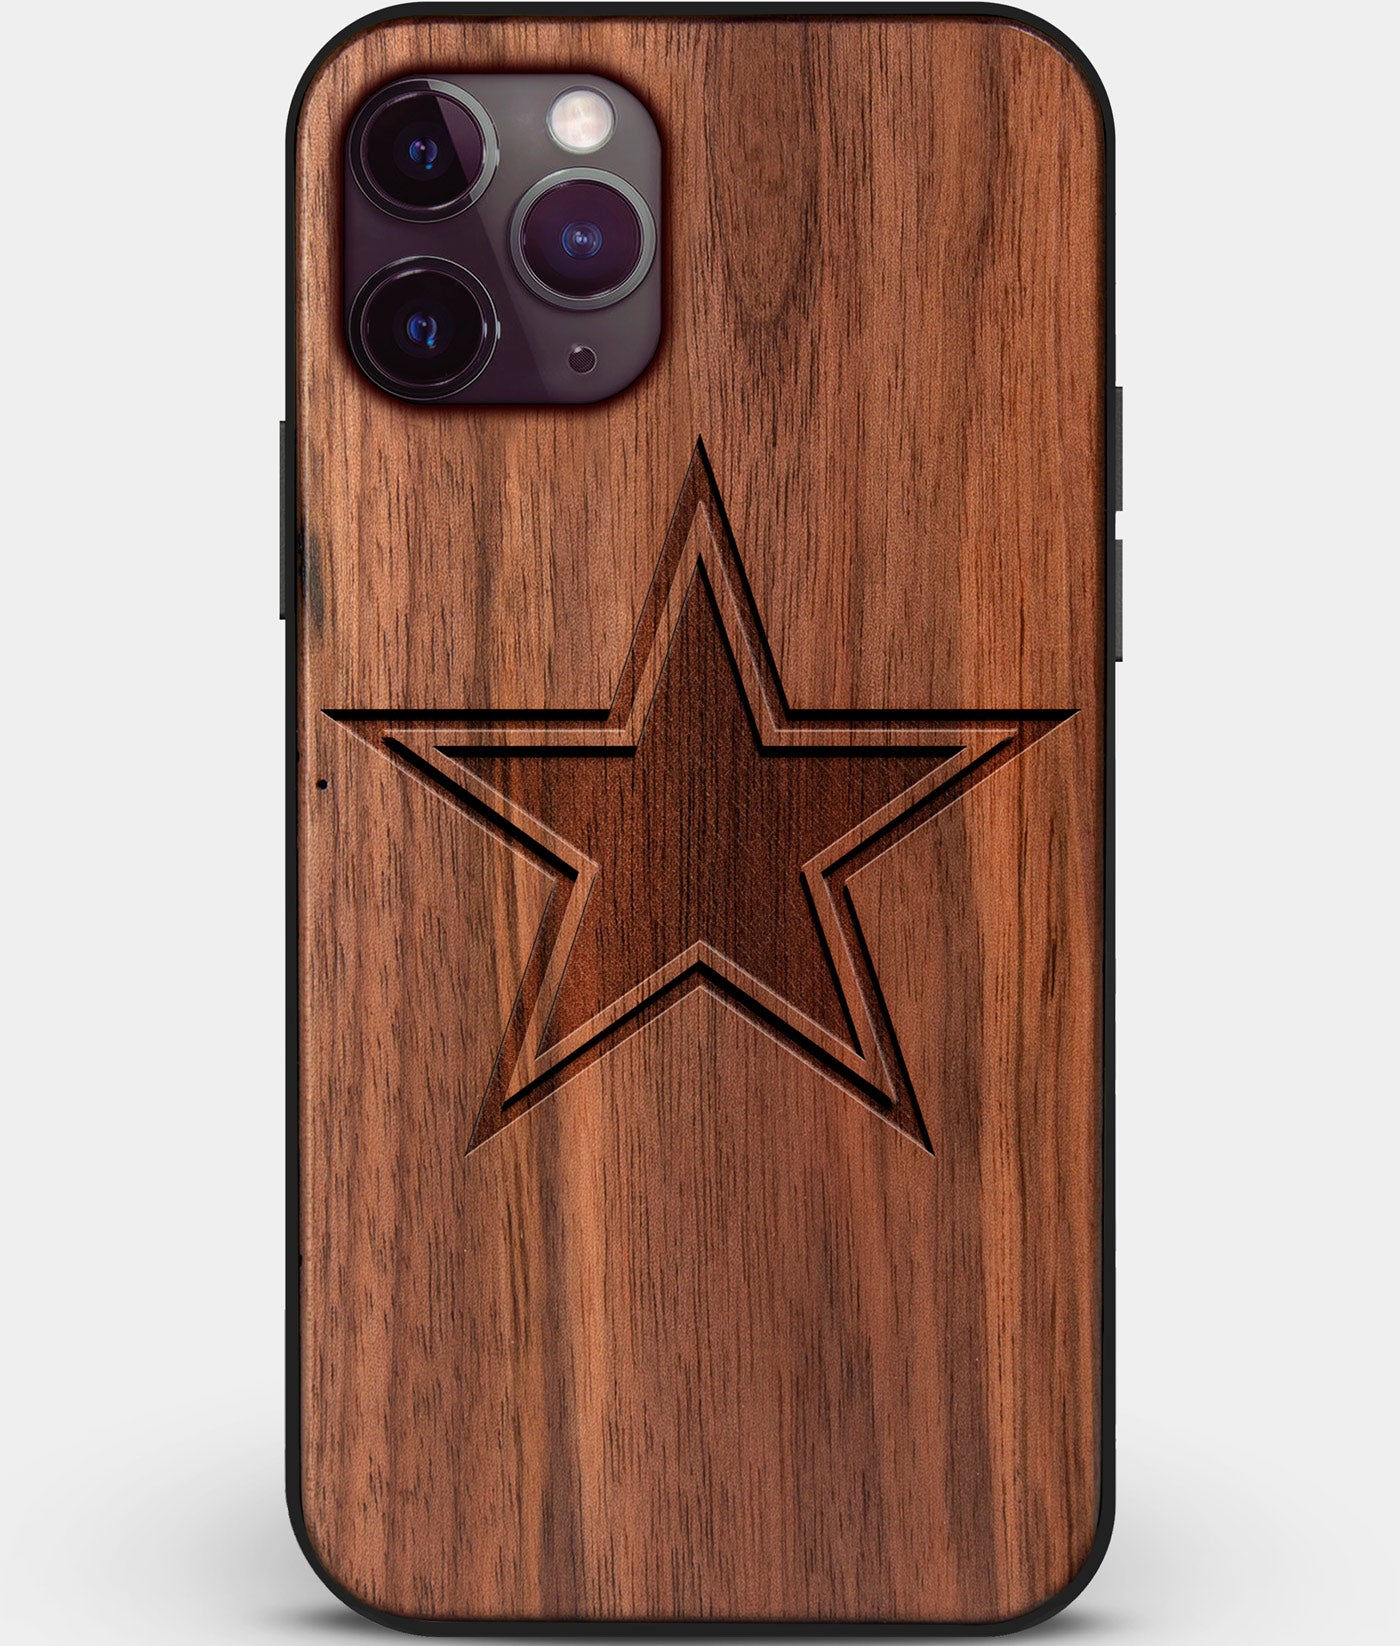 Custom Carved Wood Dallas Cowboys iPhone 11 Pro Max Case | Personalized Walnut Wood Dallas Cowboys Cover, Birthday Gift, Gifts For Him, Monogrammed Gift For Fan | by Engraved In Nature